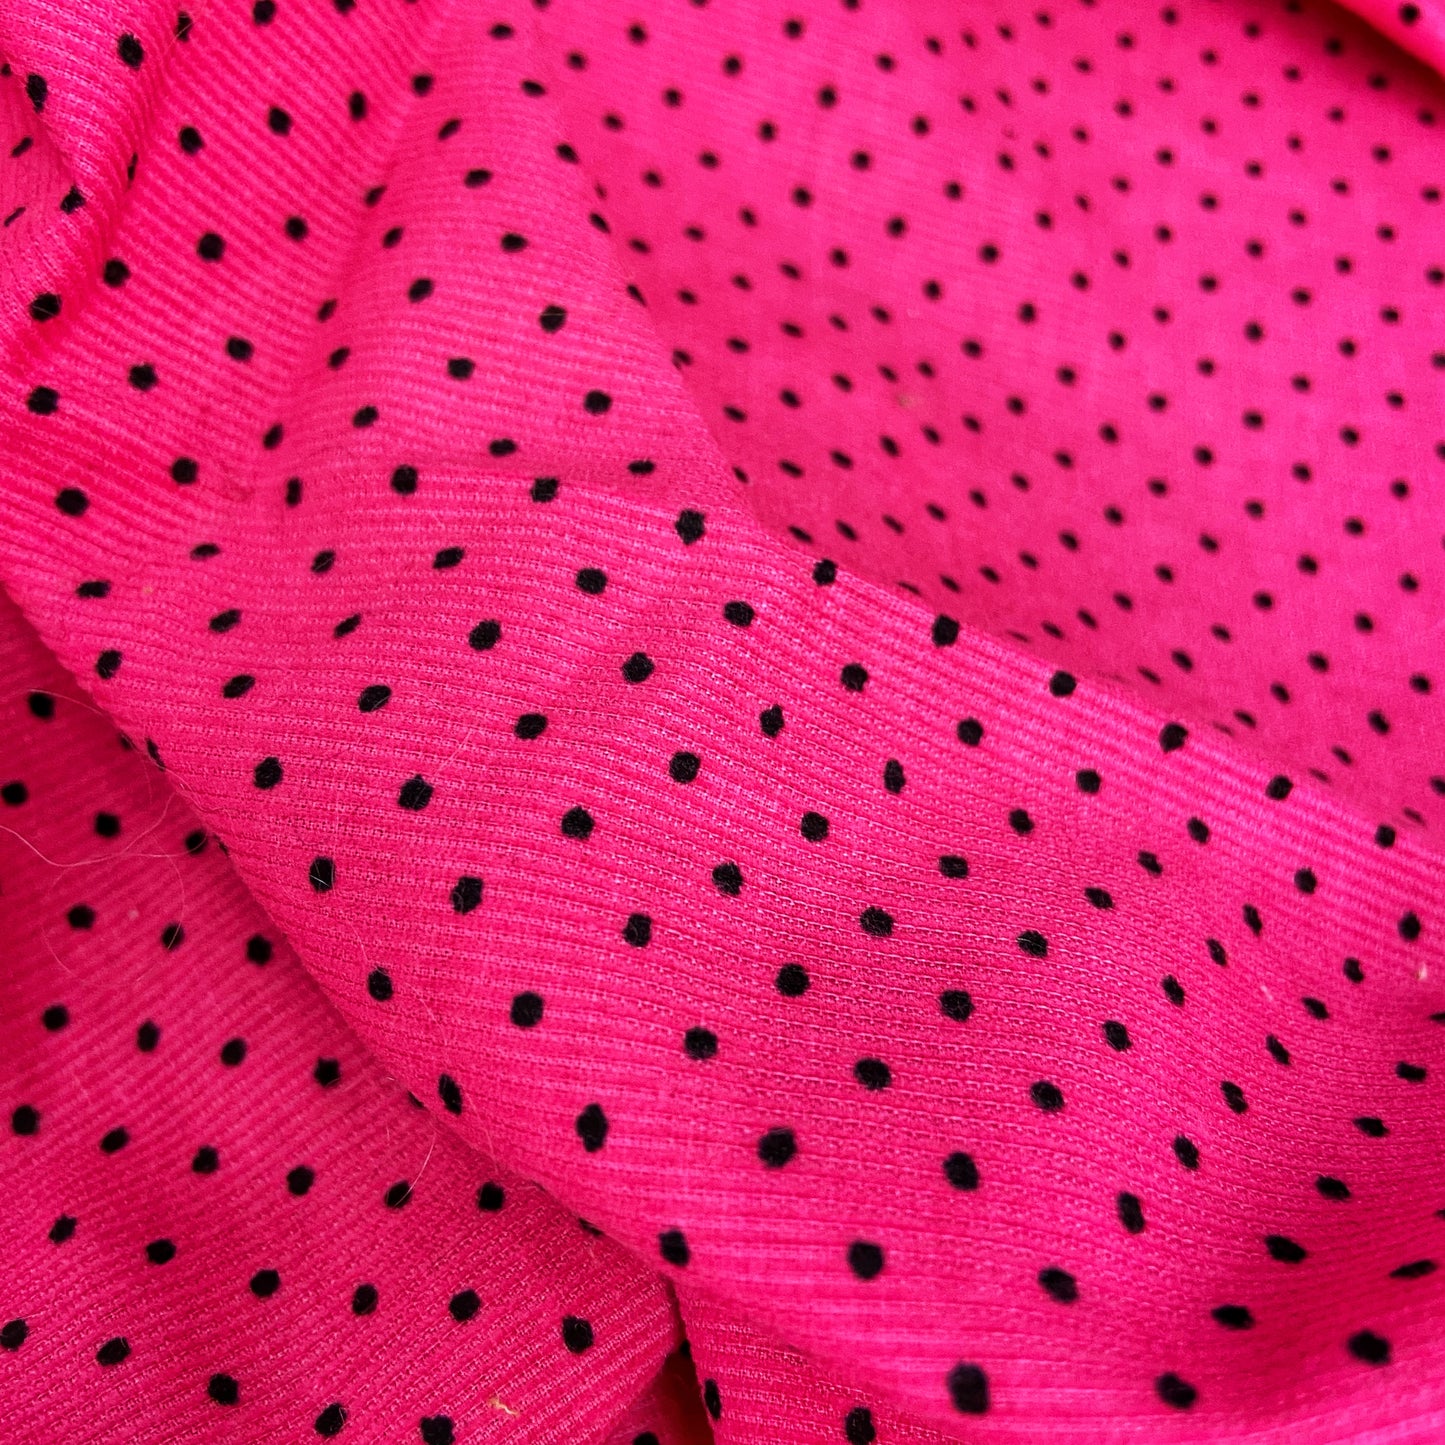 Pink with Black Spot Print Needle Cord Fabric - Perfect for Bag Lining